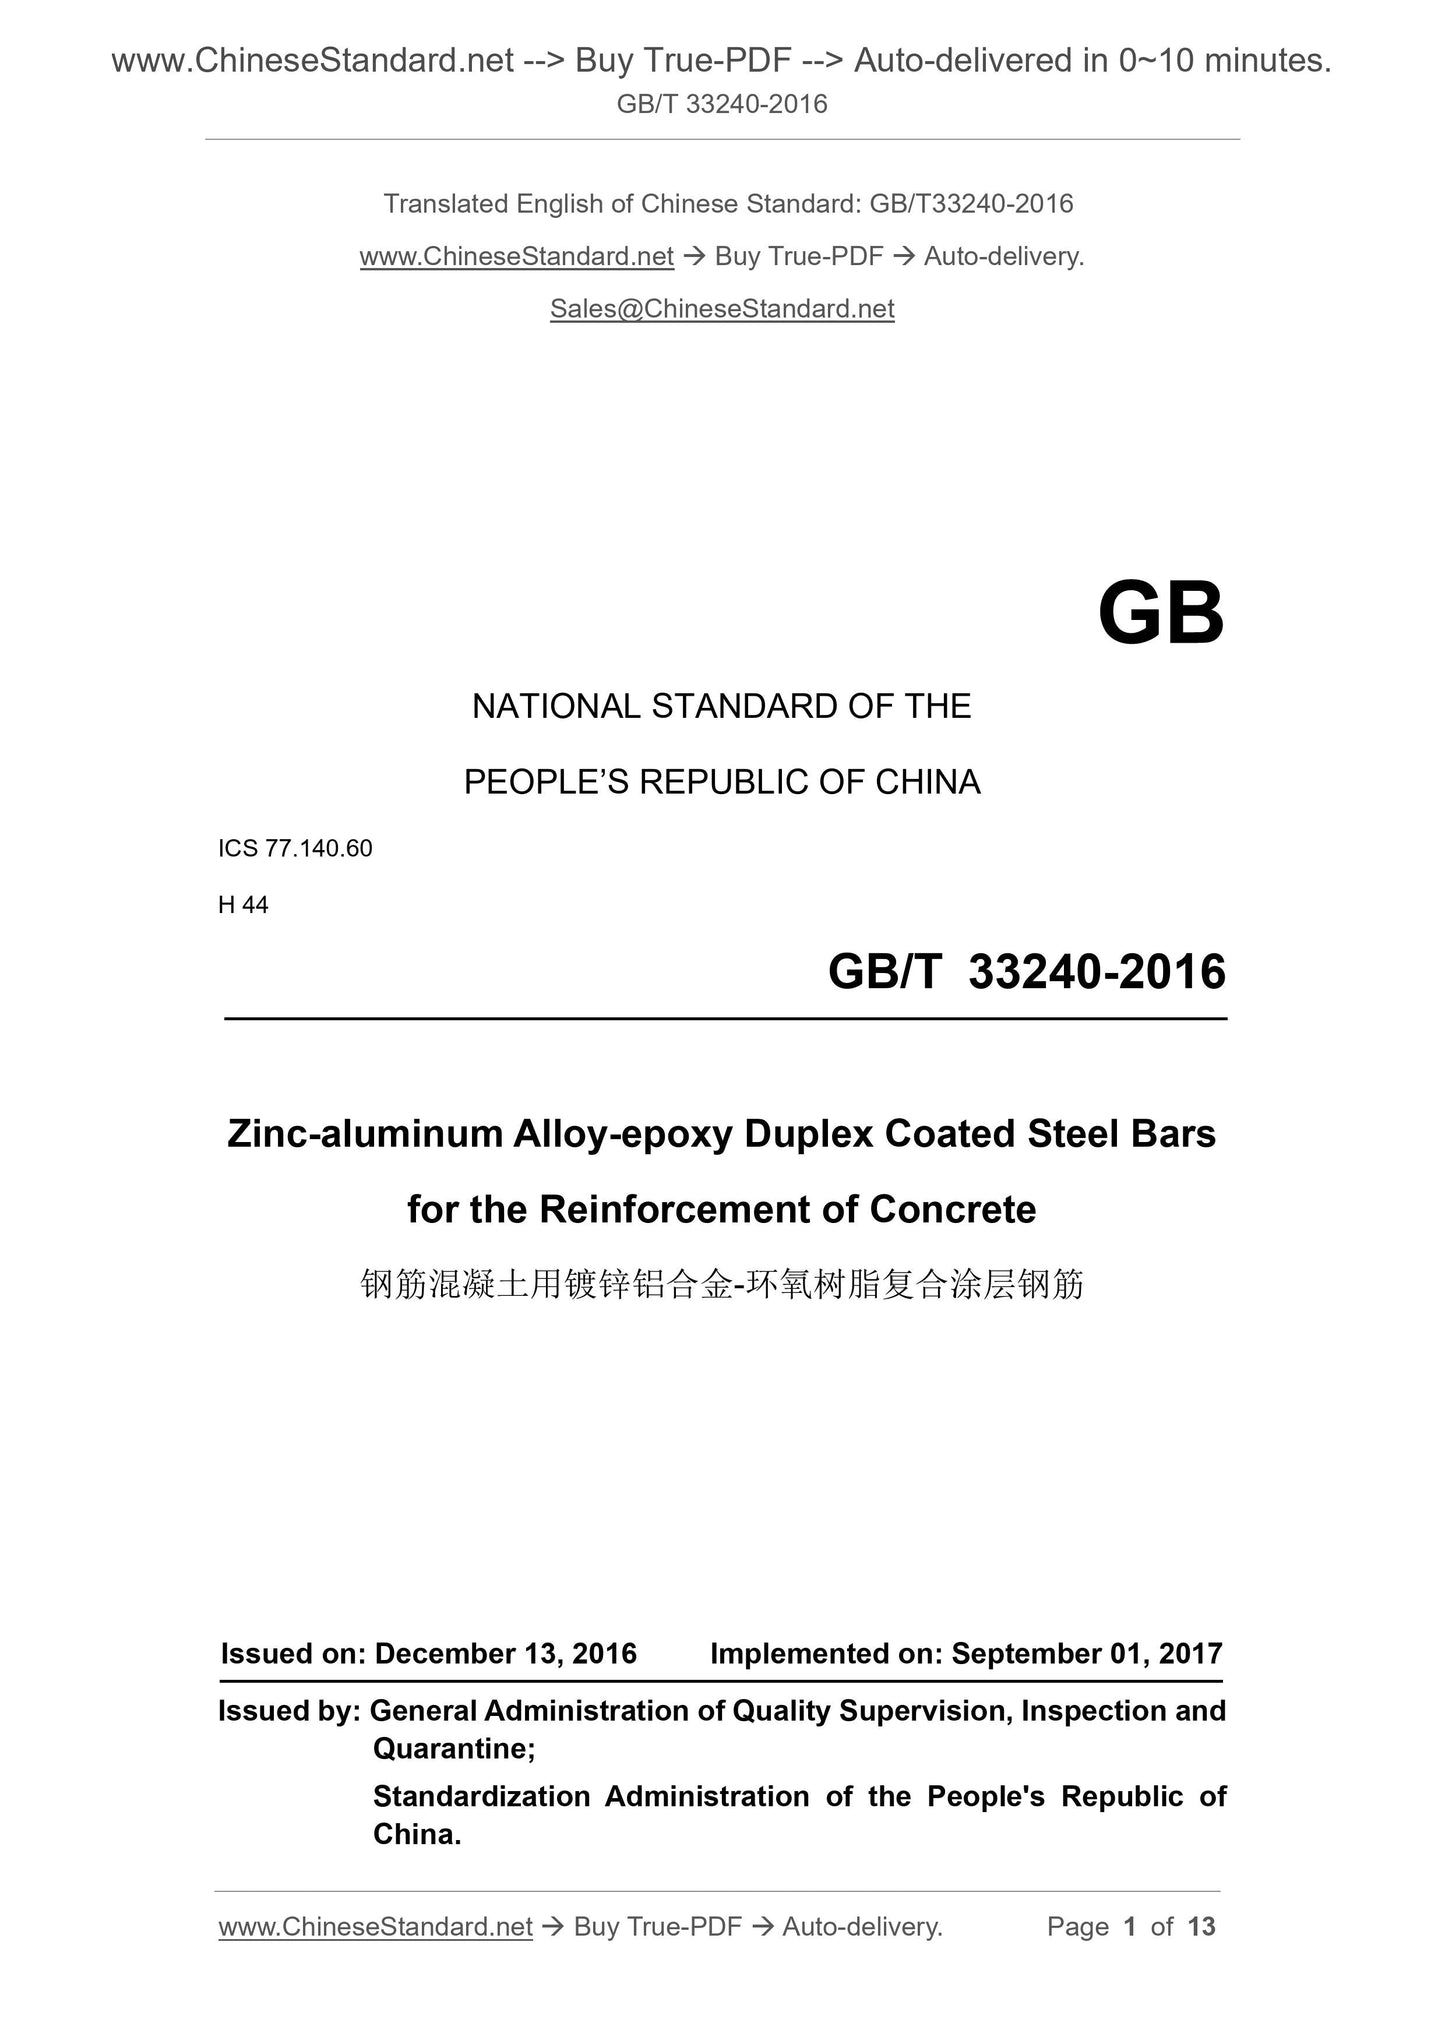 GB/T 33240-2016 Page 1